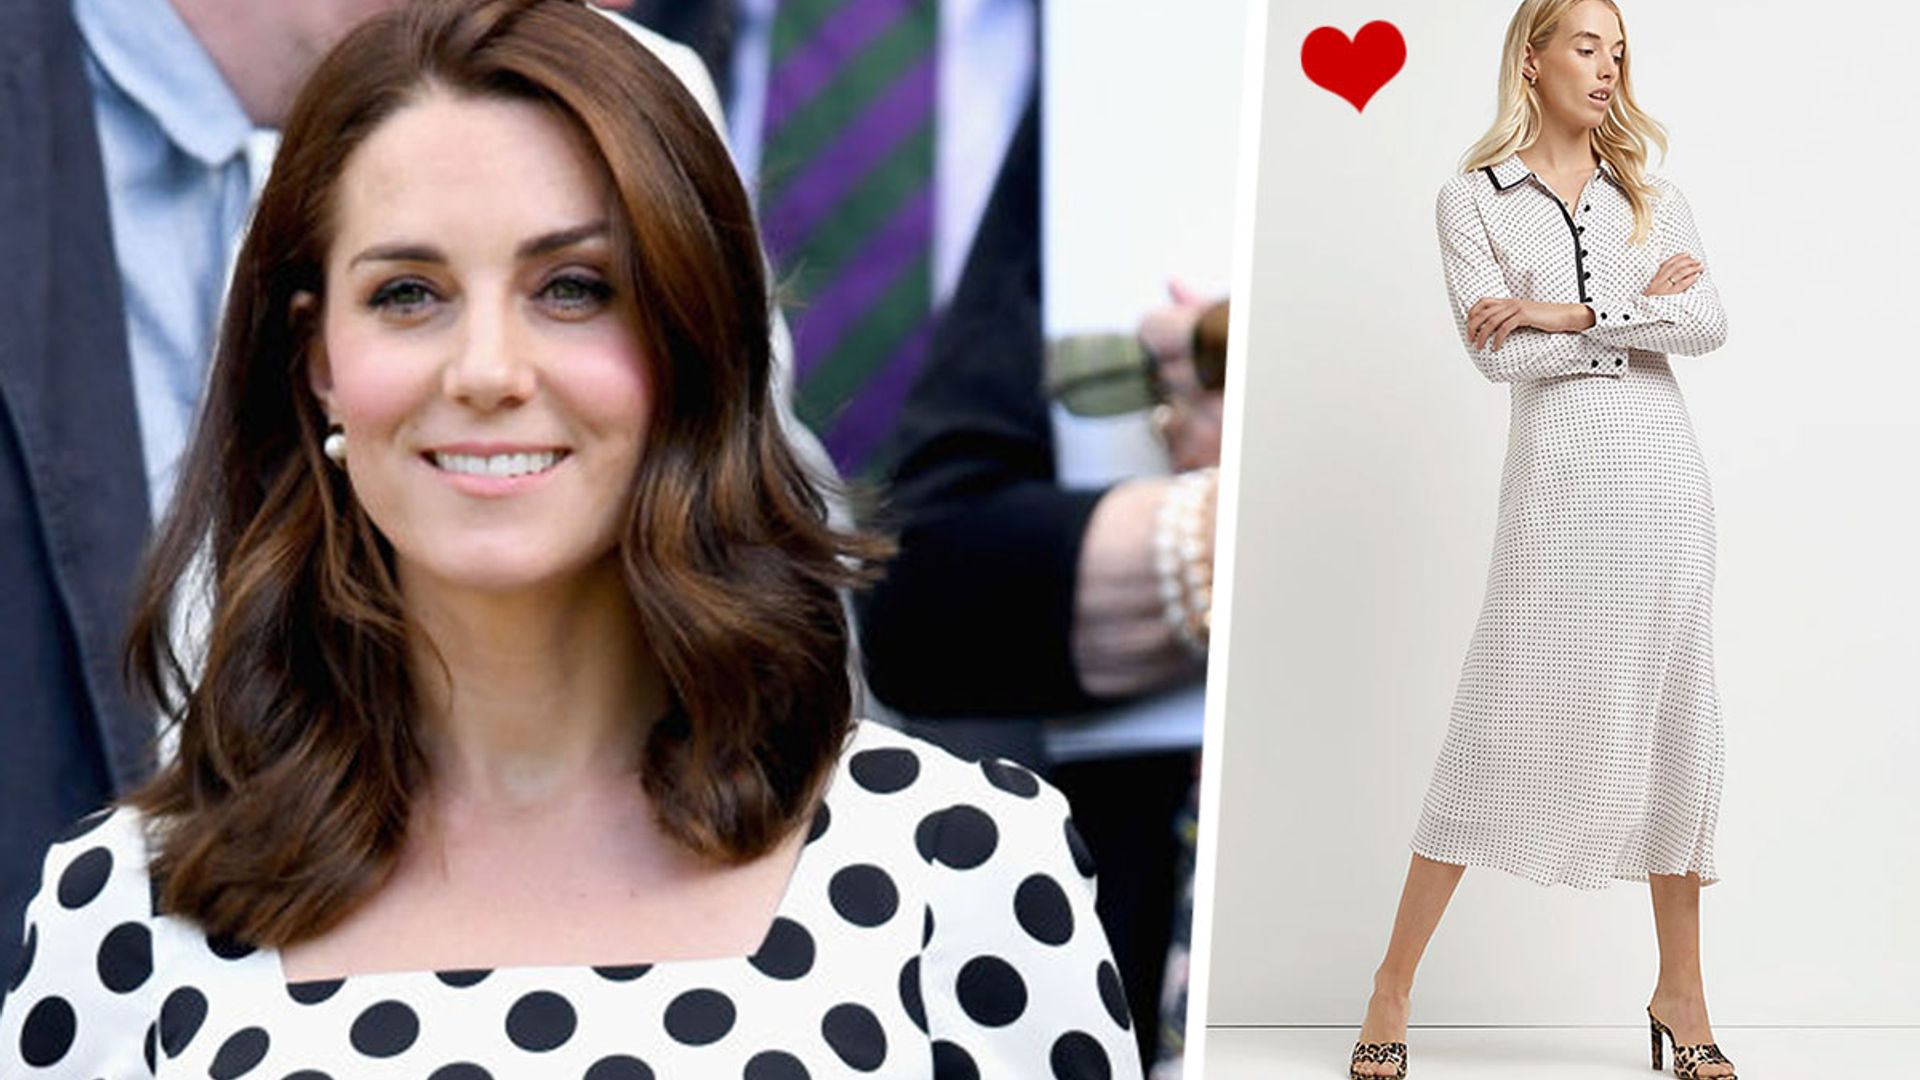 River Island's new-in polka dot dress has Kate Middleton's name all over it